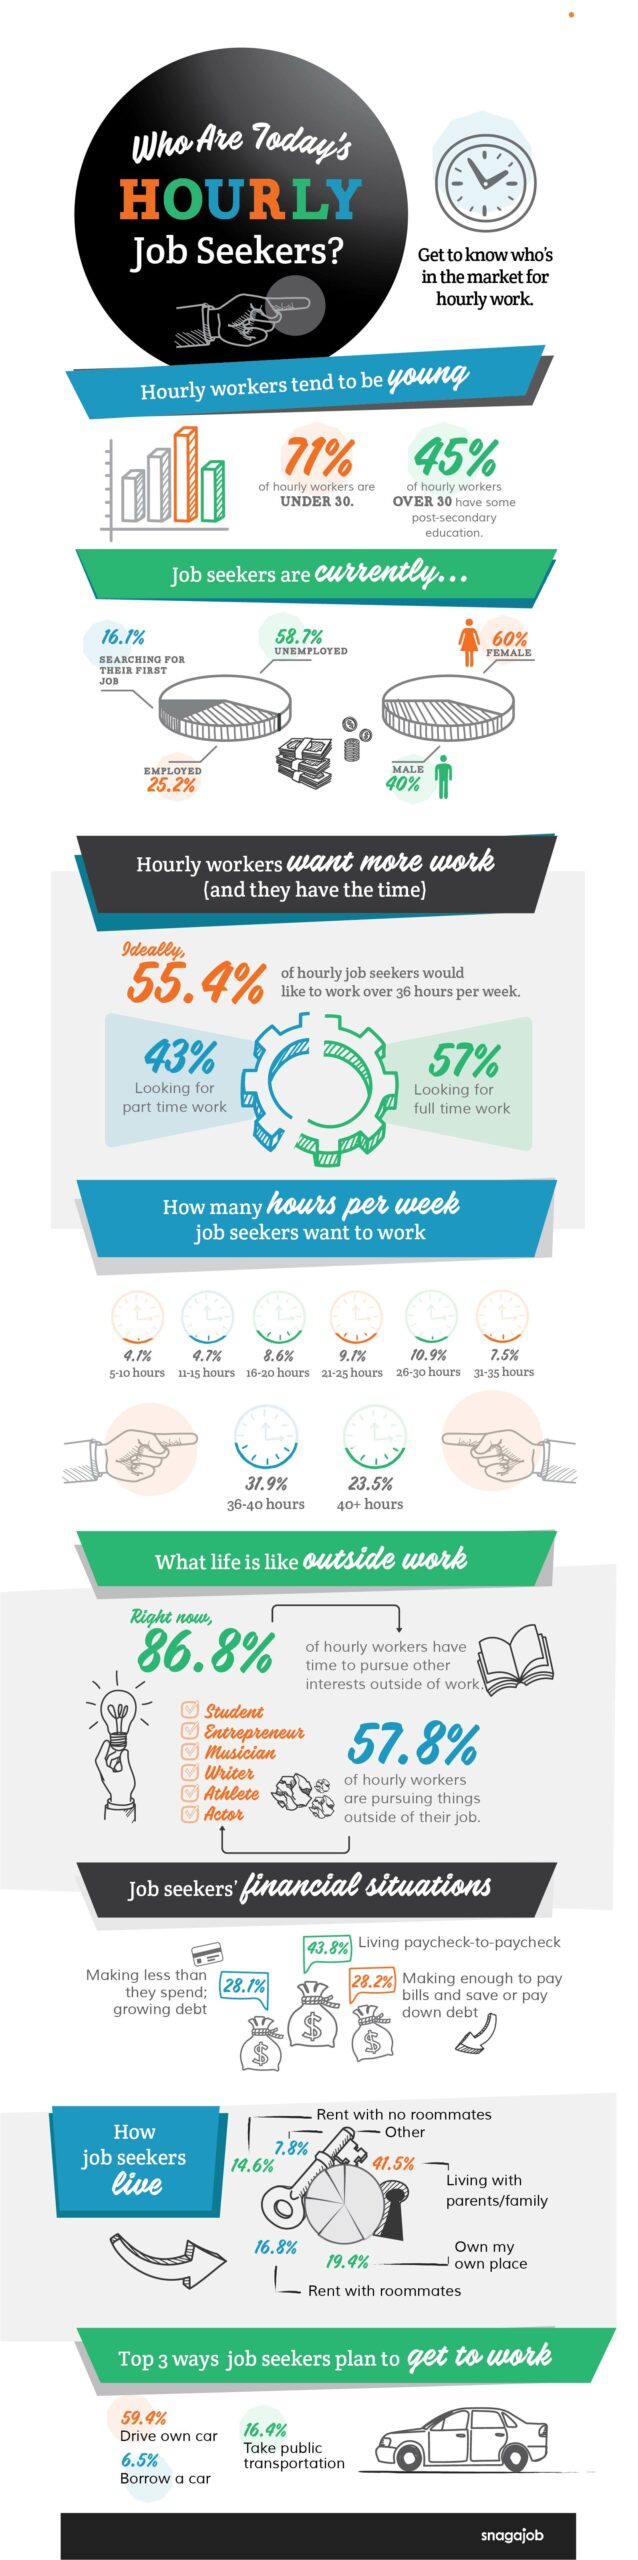 Snagajob Who are Today's Hourly Job Seekers? Infographic